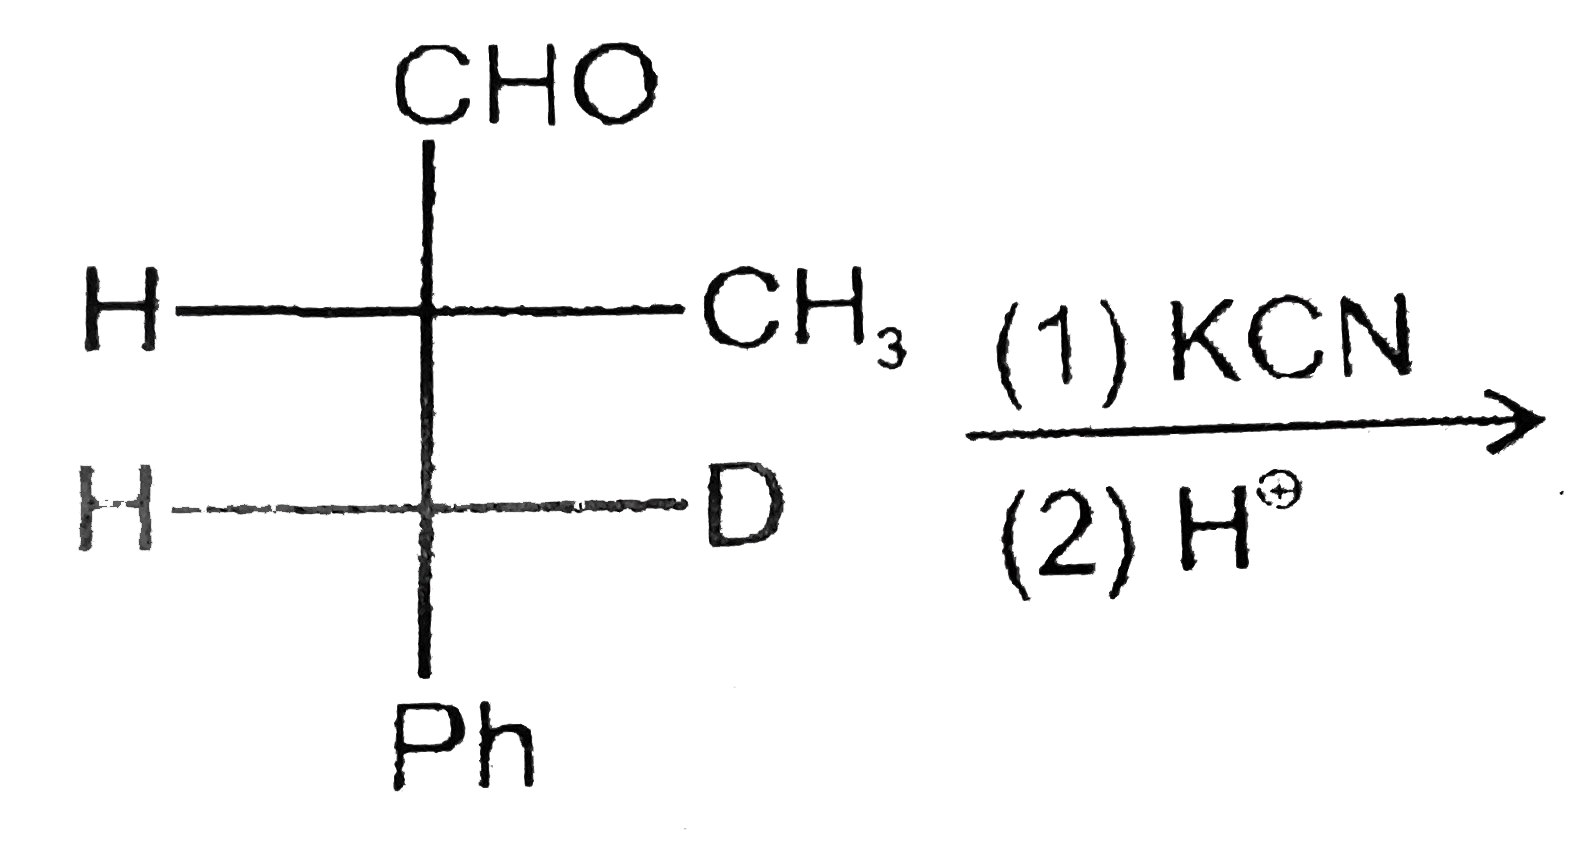 Total number of products formed in the following reaction is: